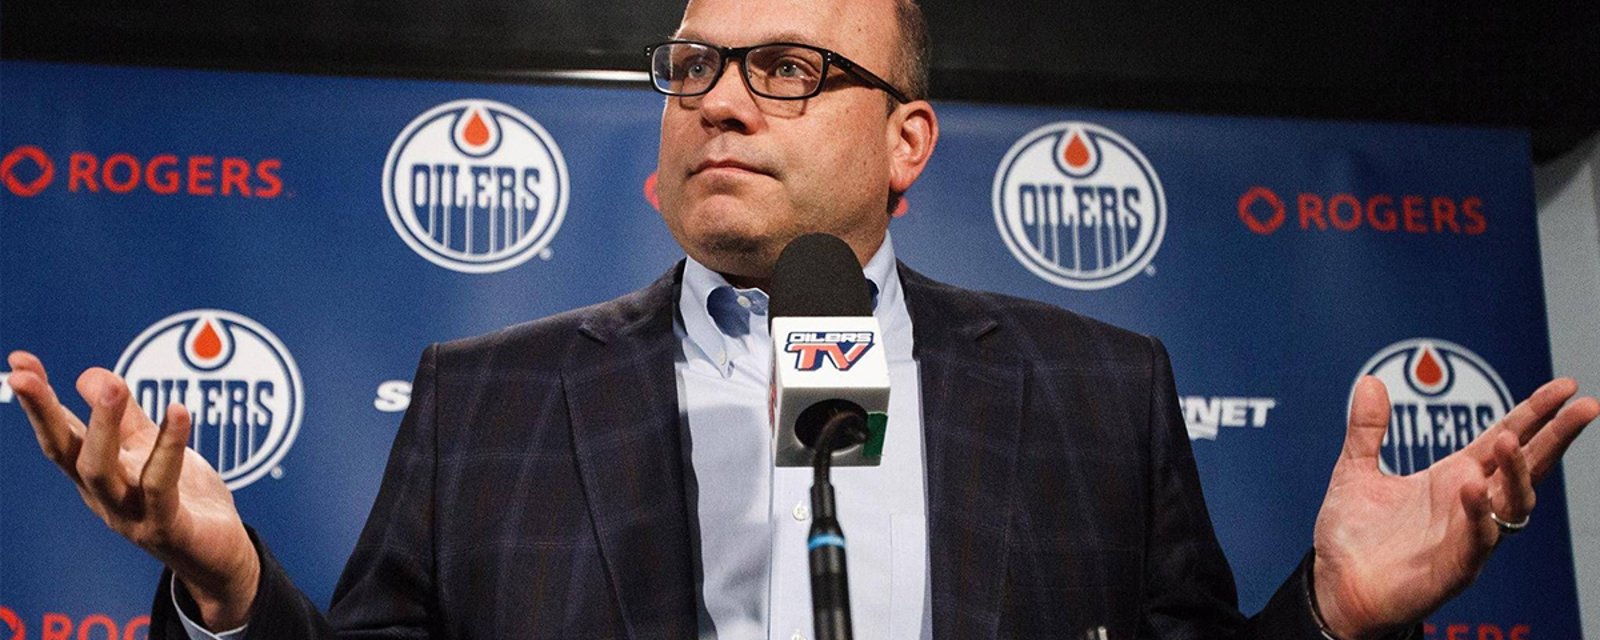 Report: Not their first choice, but Oilers forced to hire Hitchcock